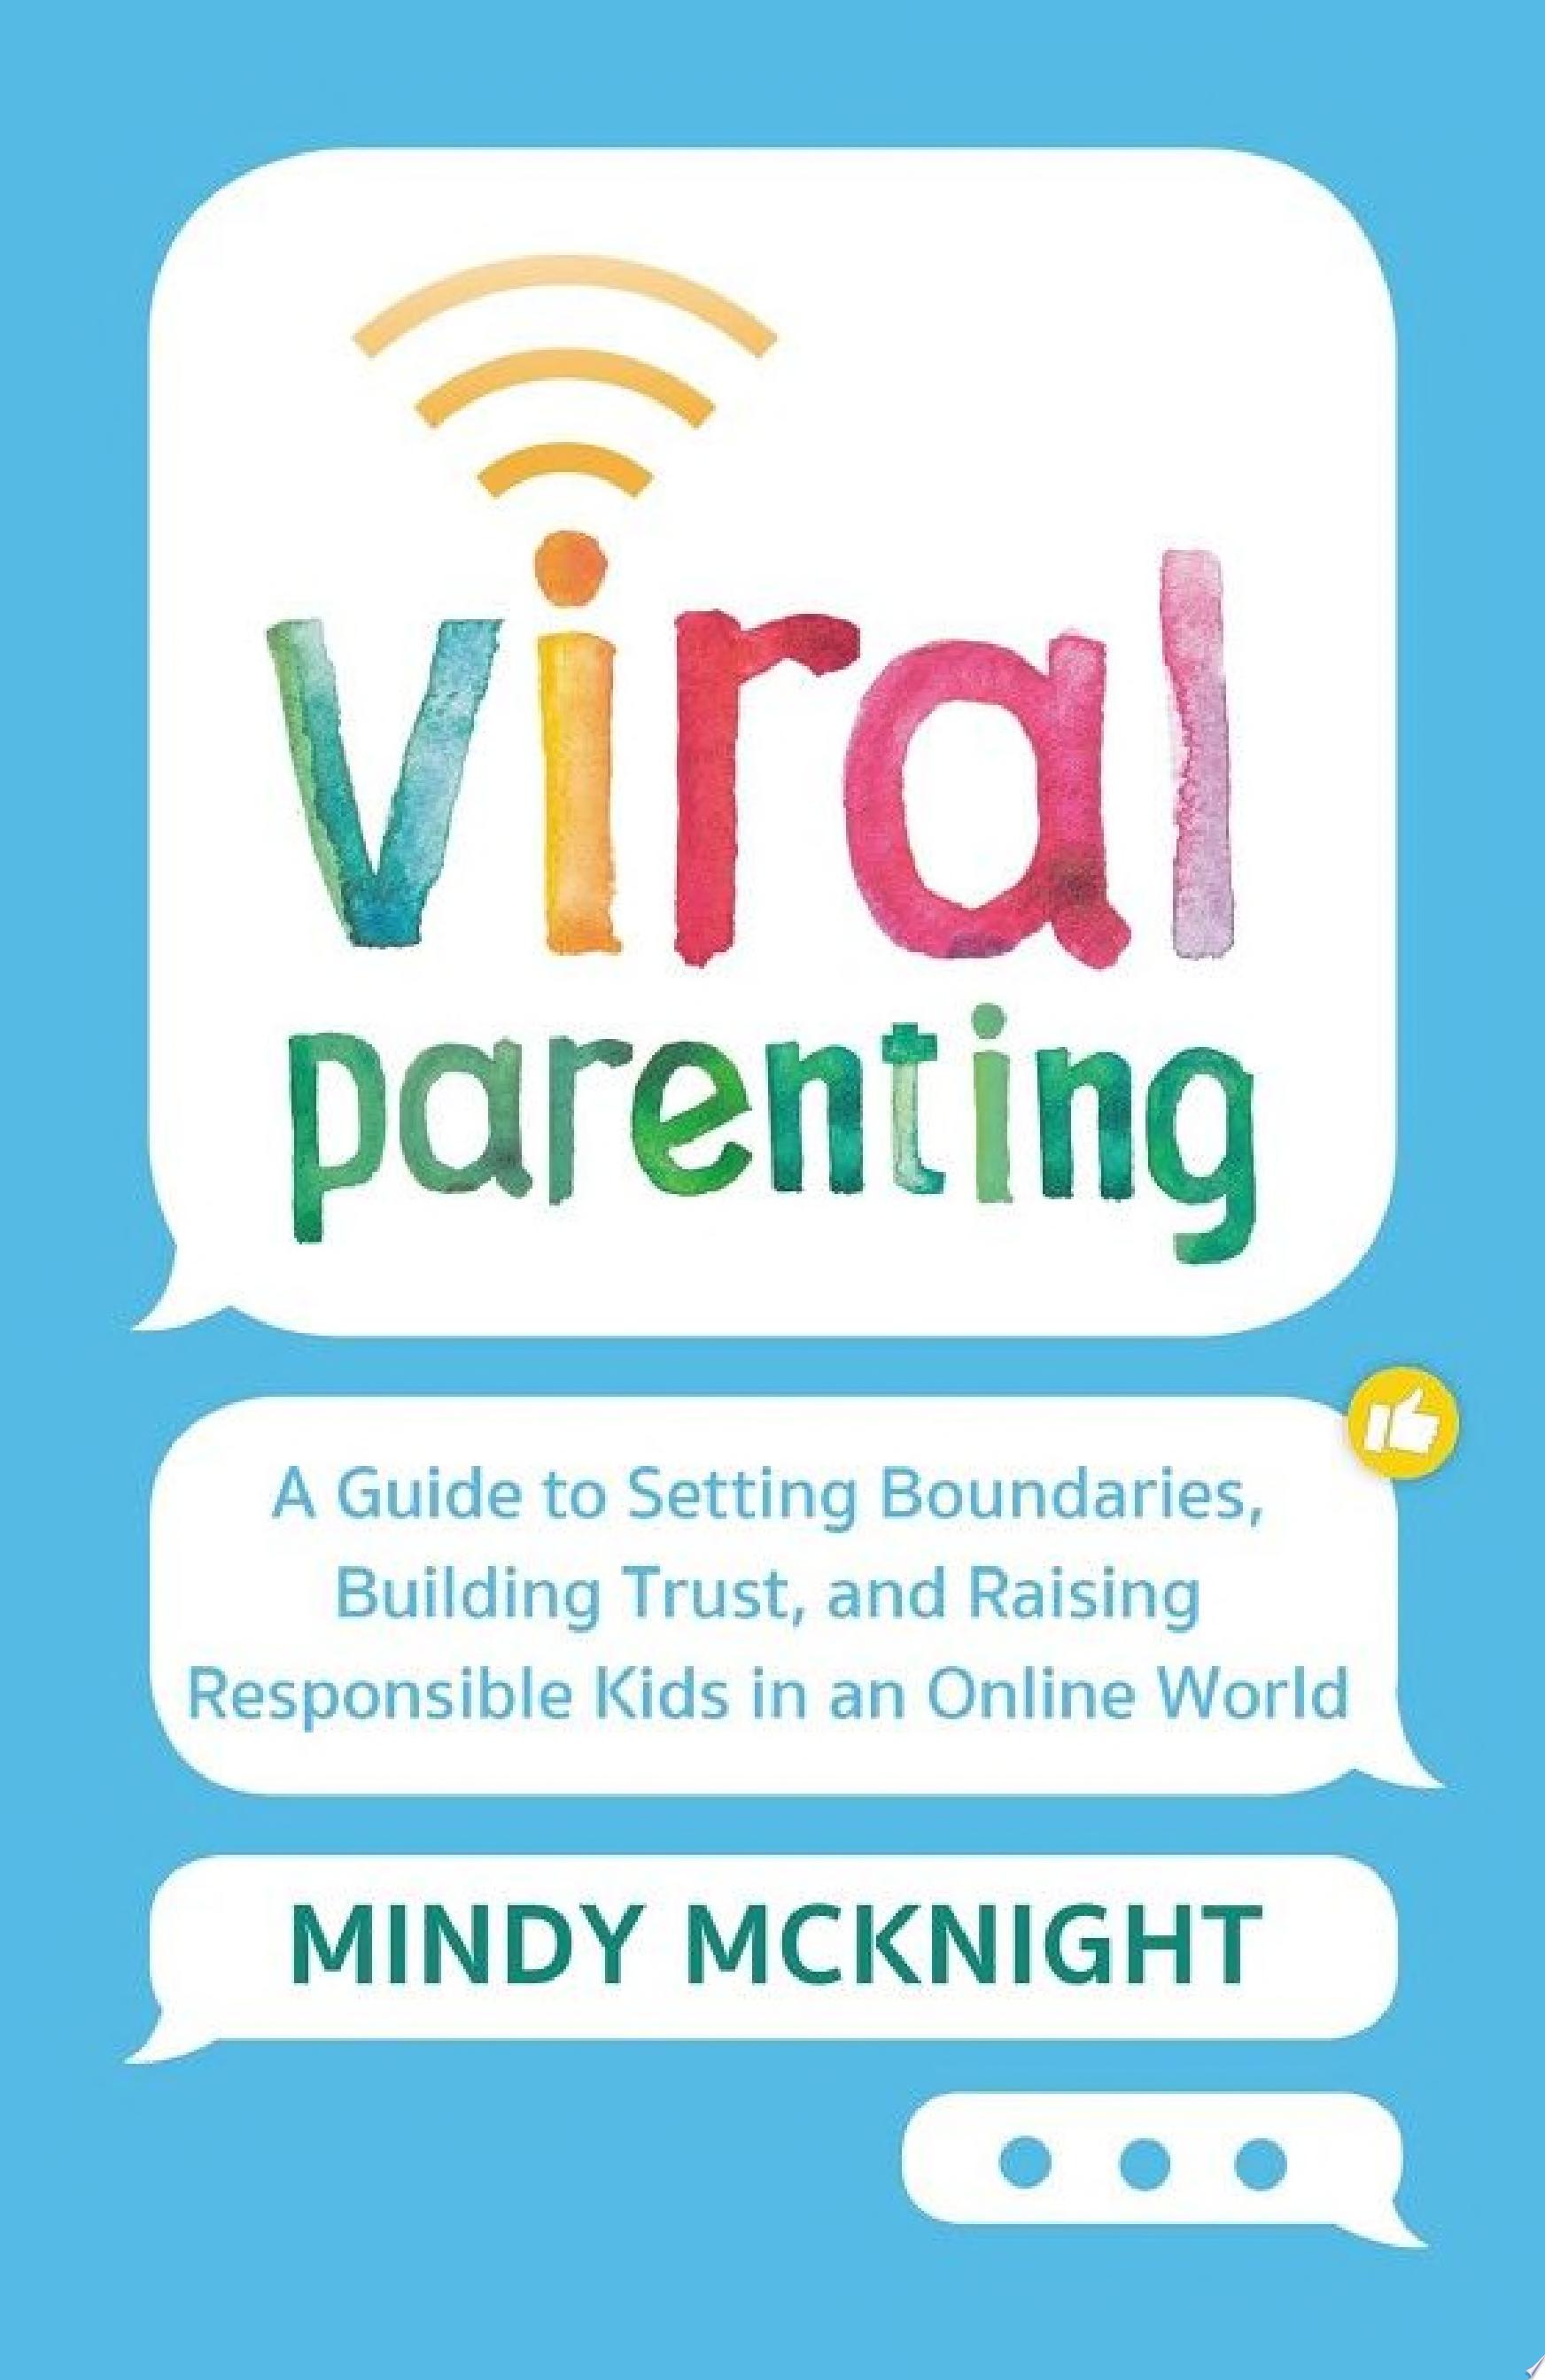 Image for "Viral Parenting"